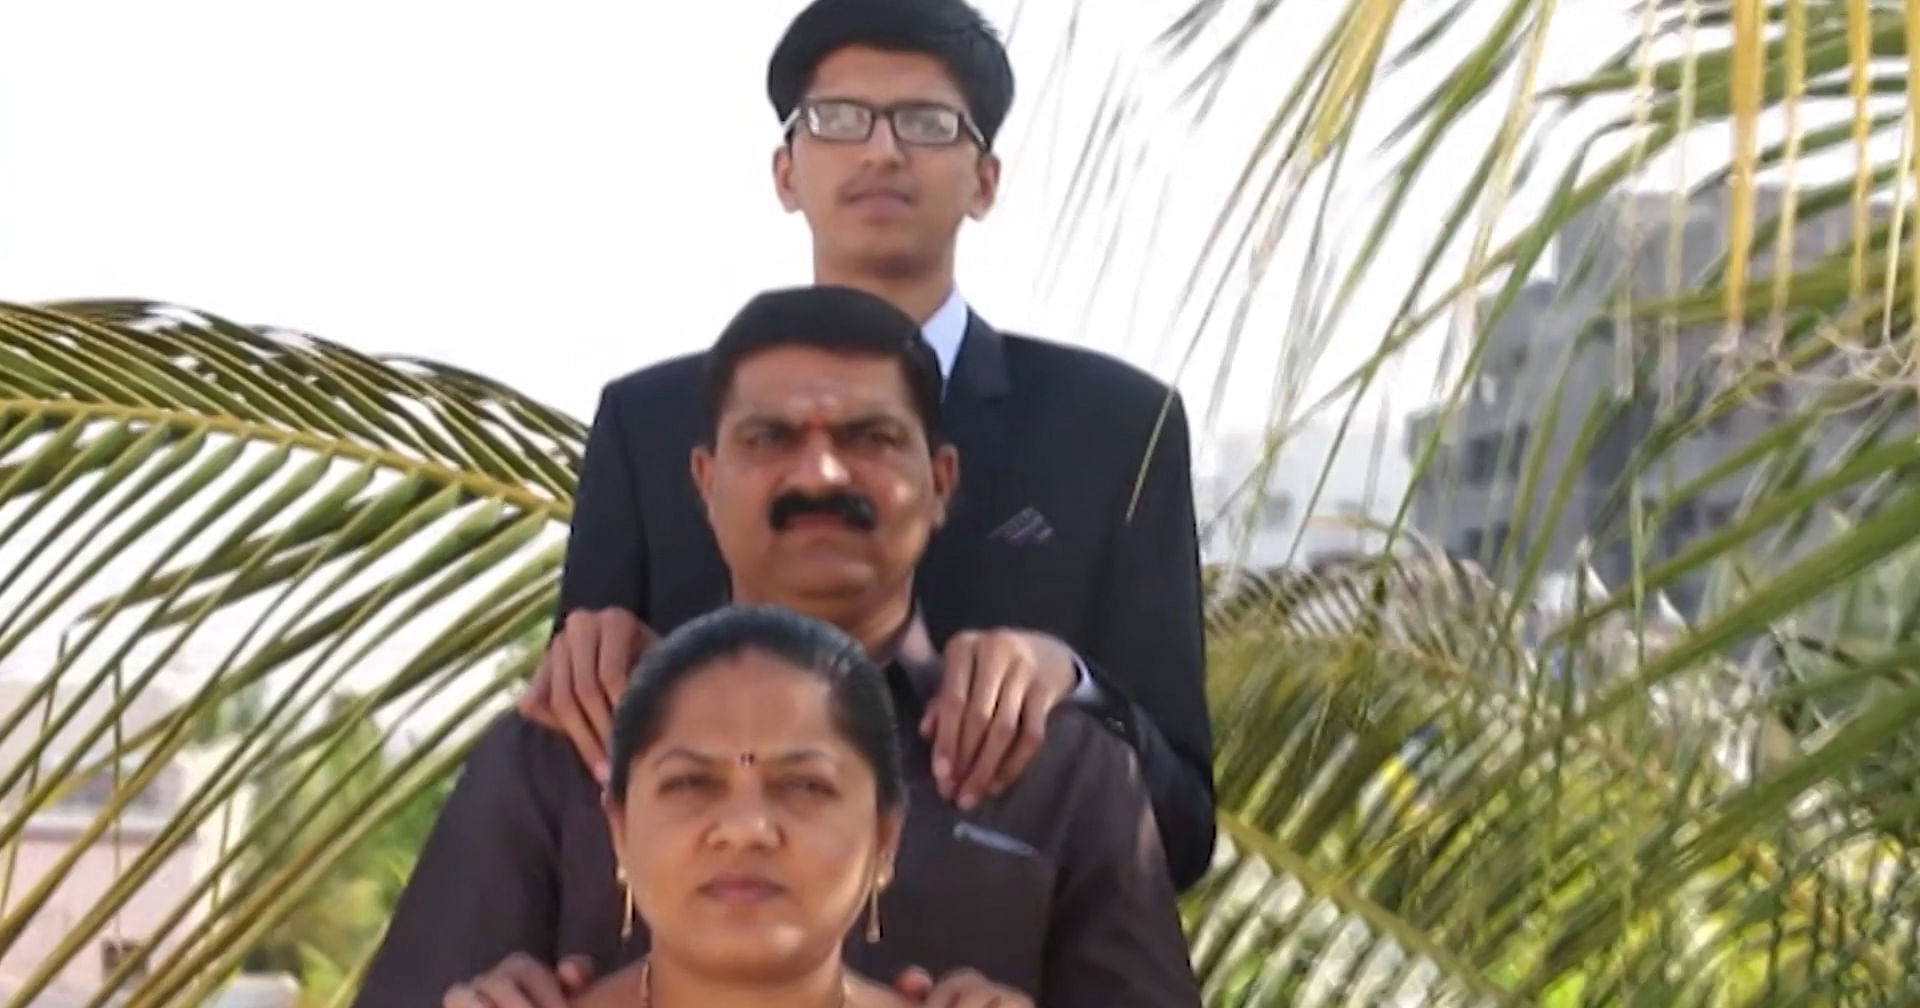 India's tallest schoolboy Yashwant Raut is 6ft 7in at 14 reveals